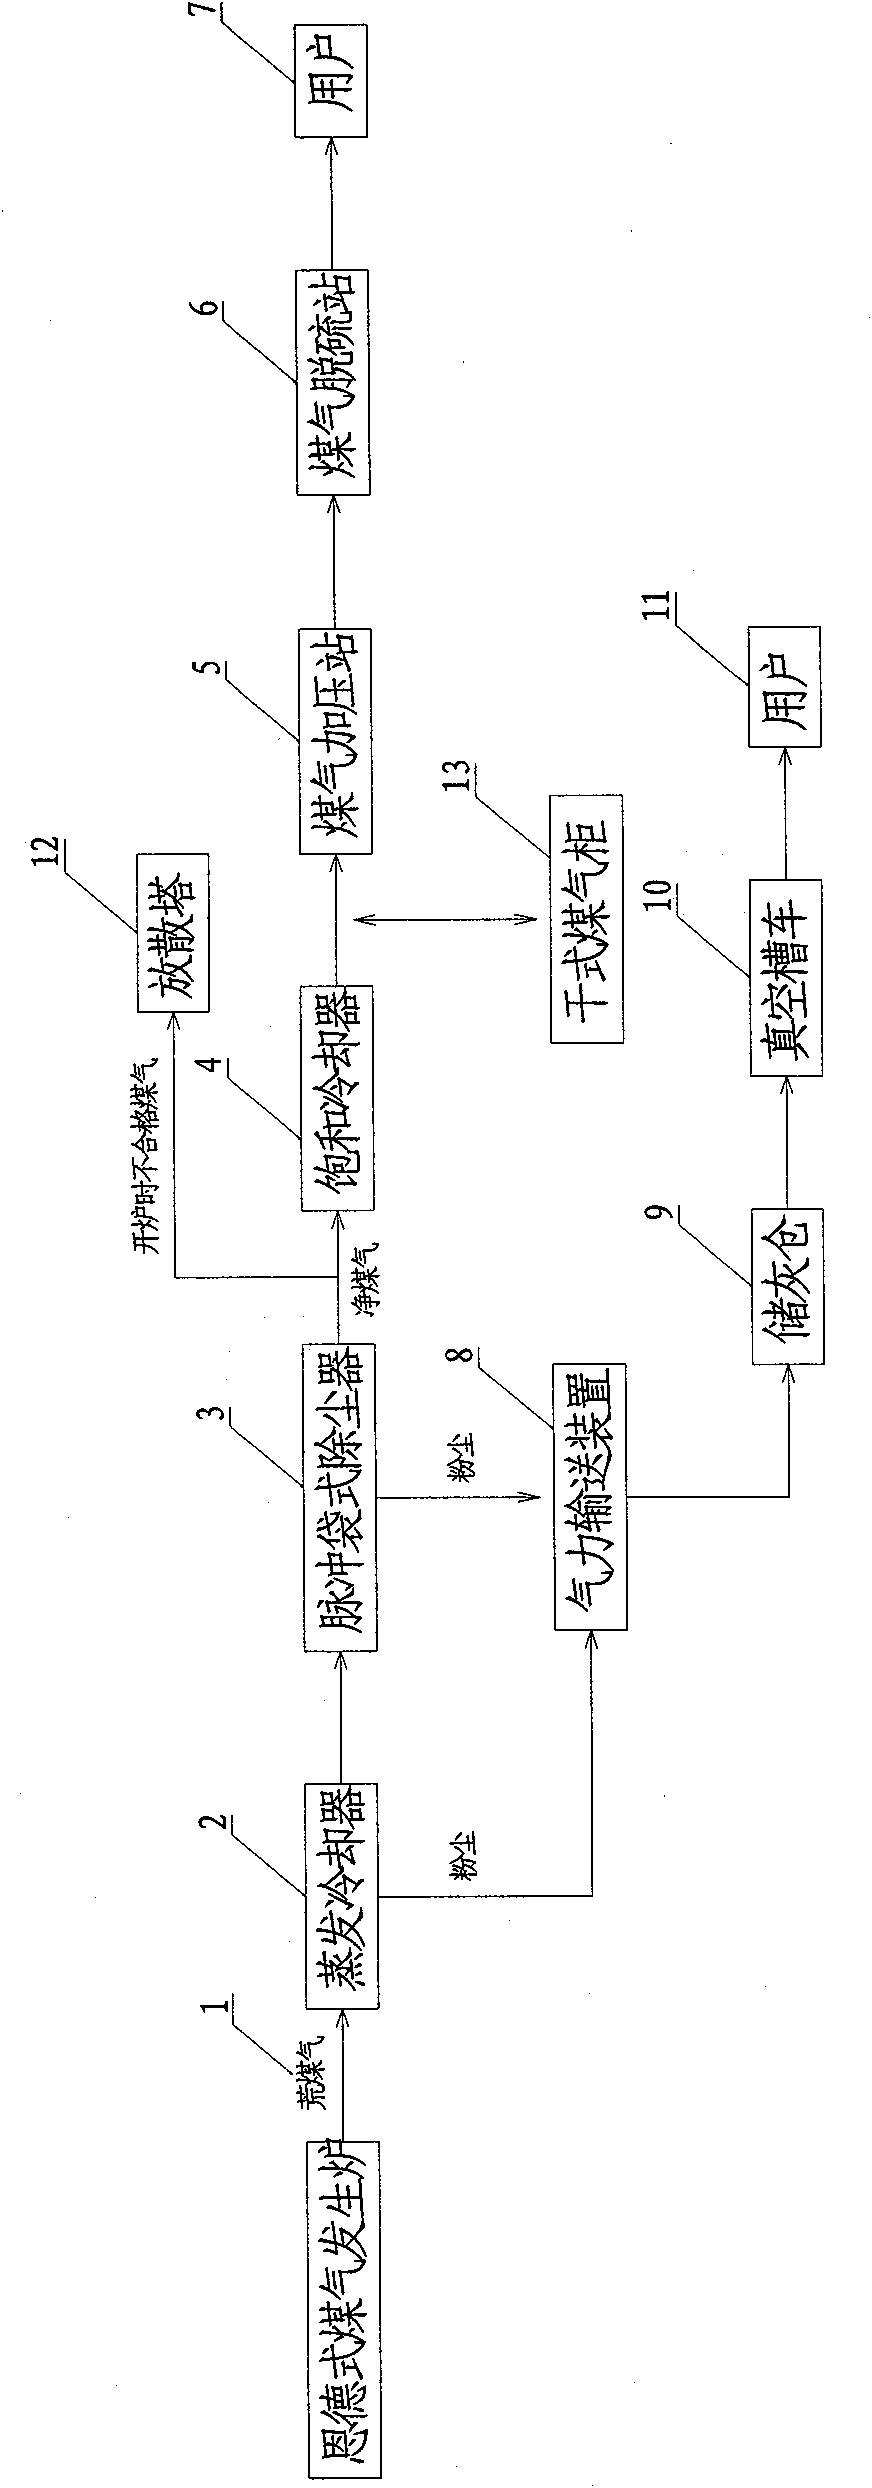 Process method for purifying raw coke oven gas from pulverized coal gasification furnace